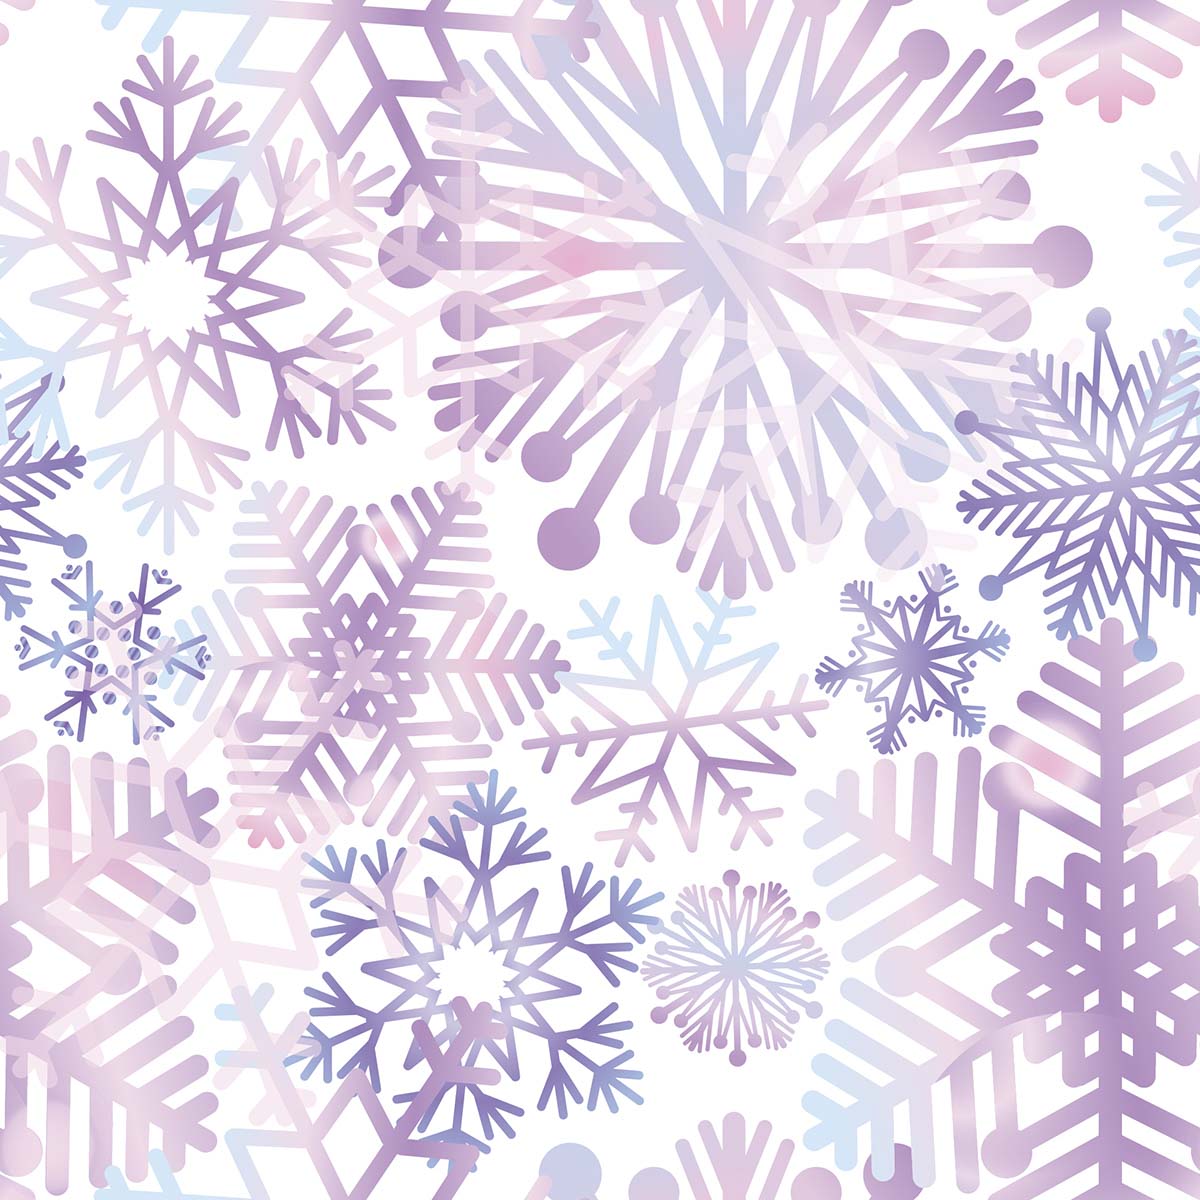 A group of snowflakes on a white background